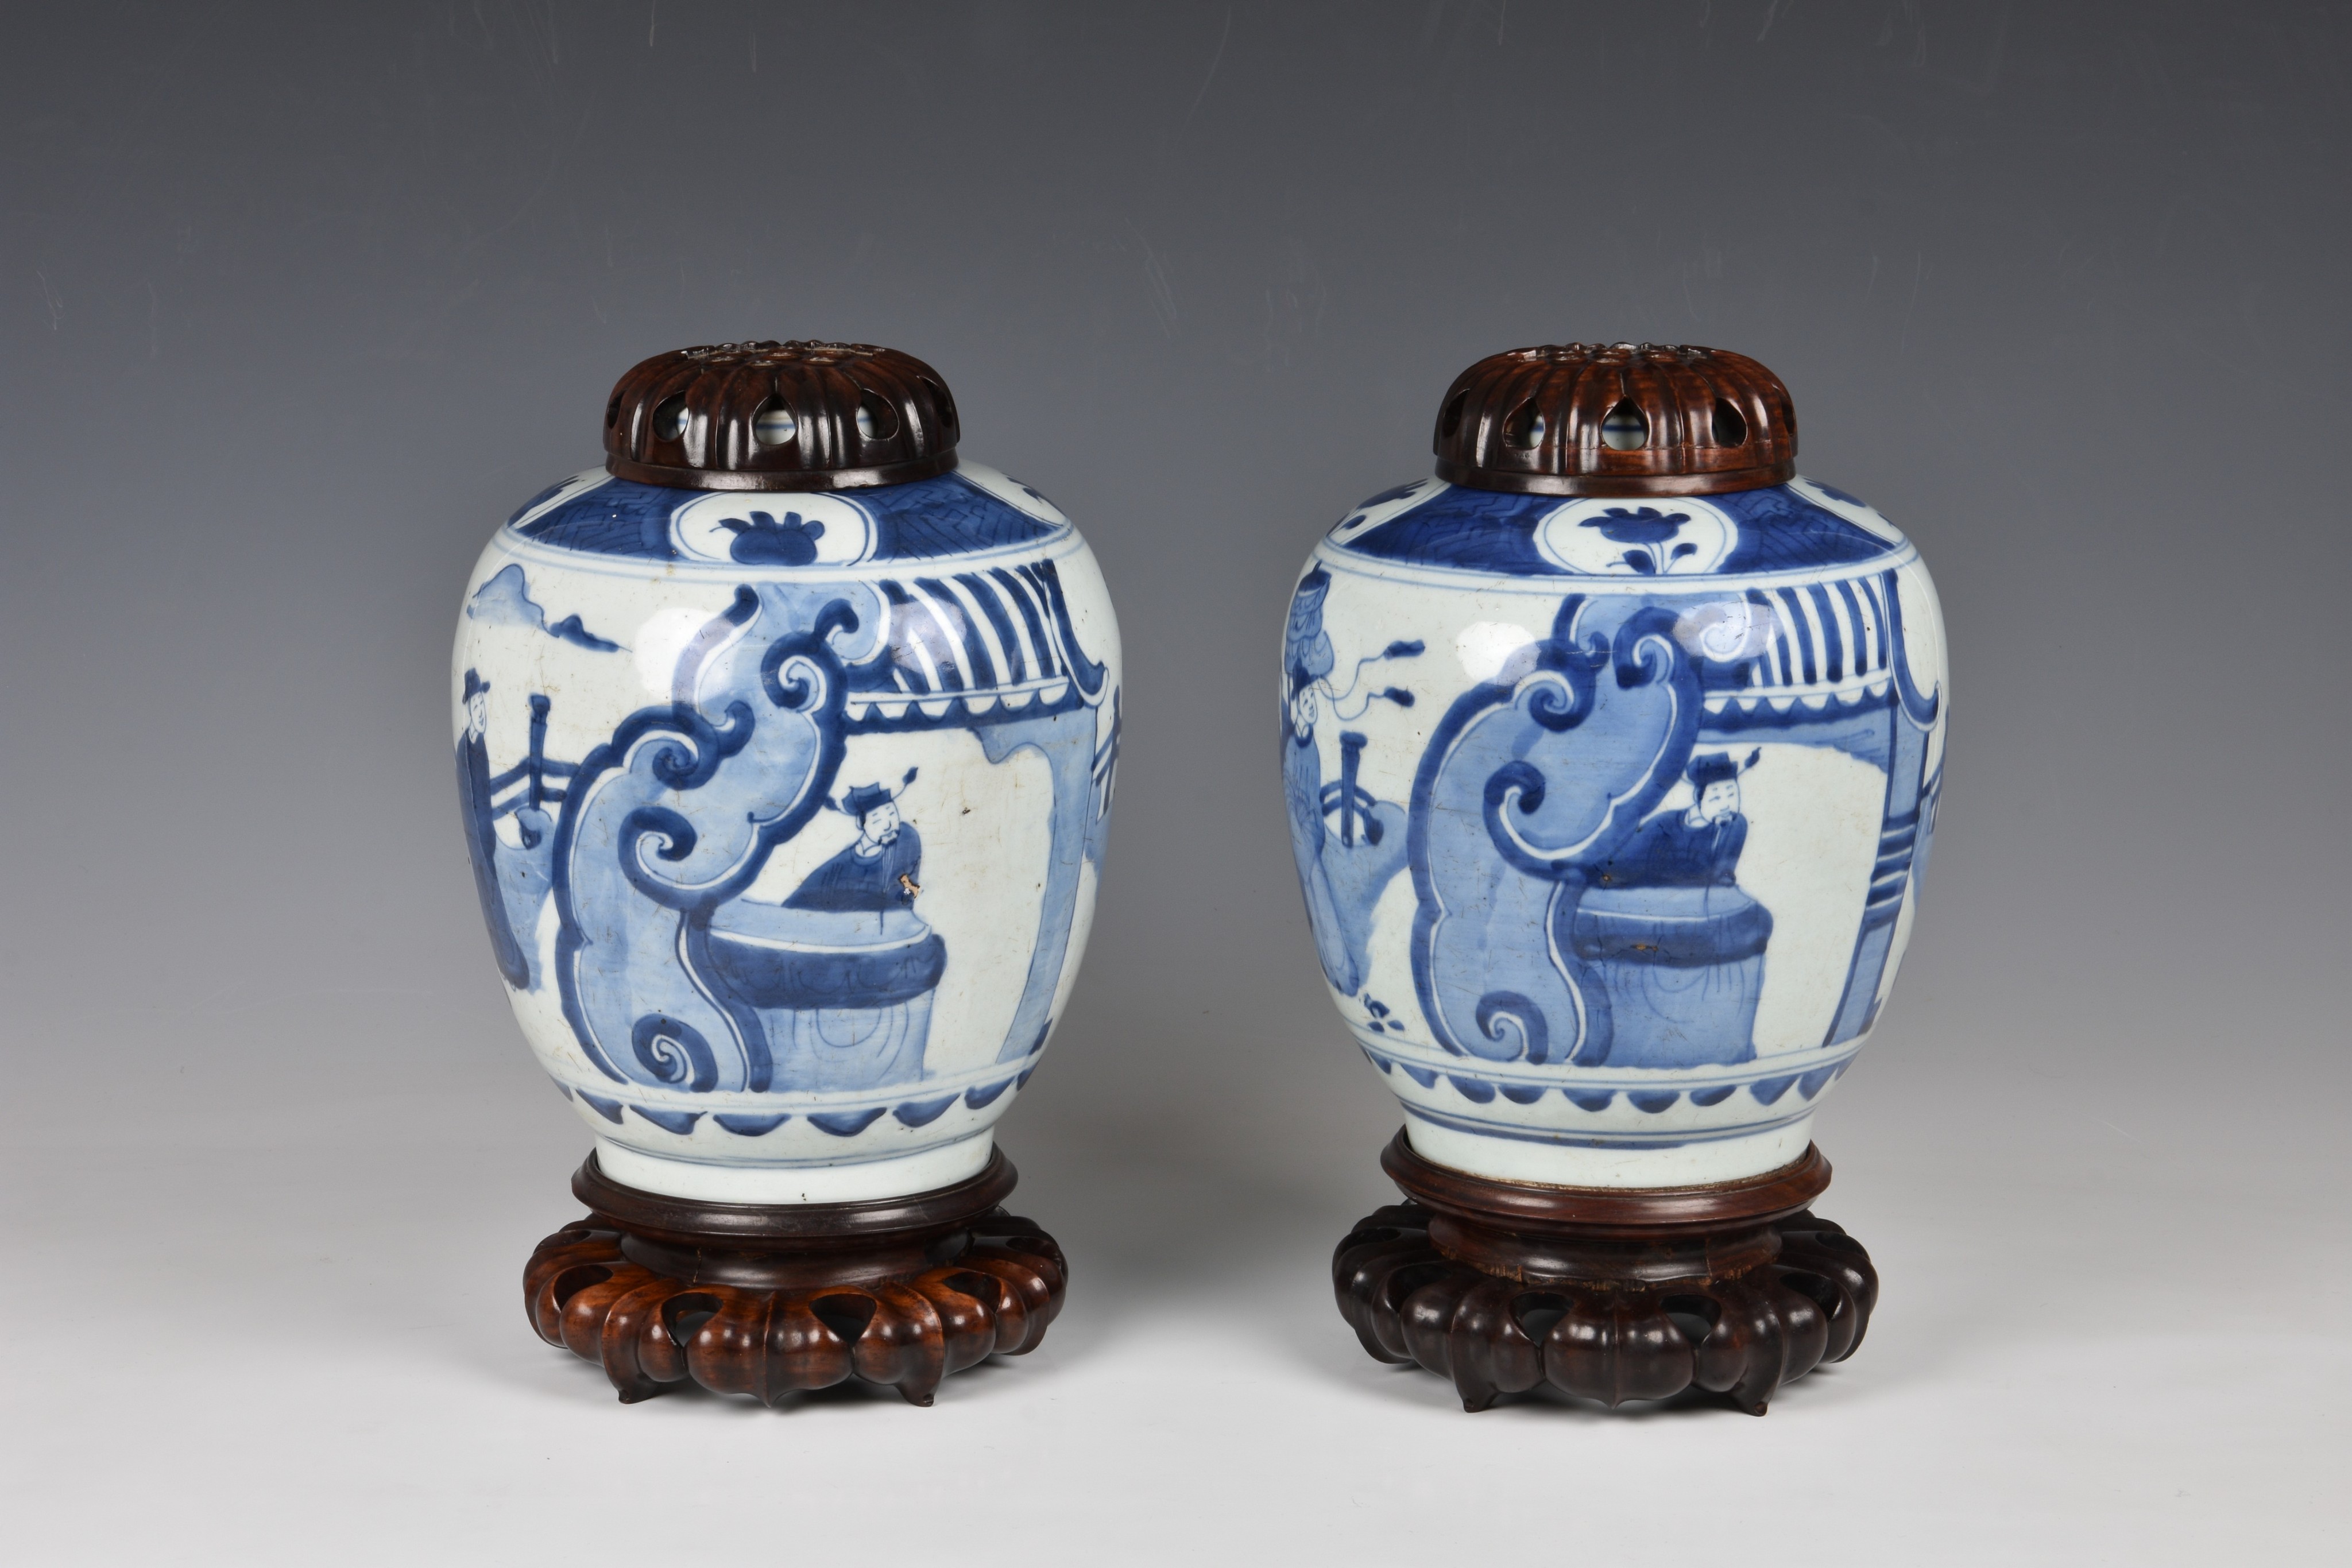 A pair of Chinese blue and white porcelain jars, Qing Dynasty, probably Kangxi period (1662-1722),